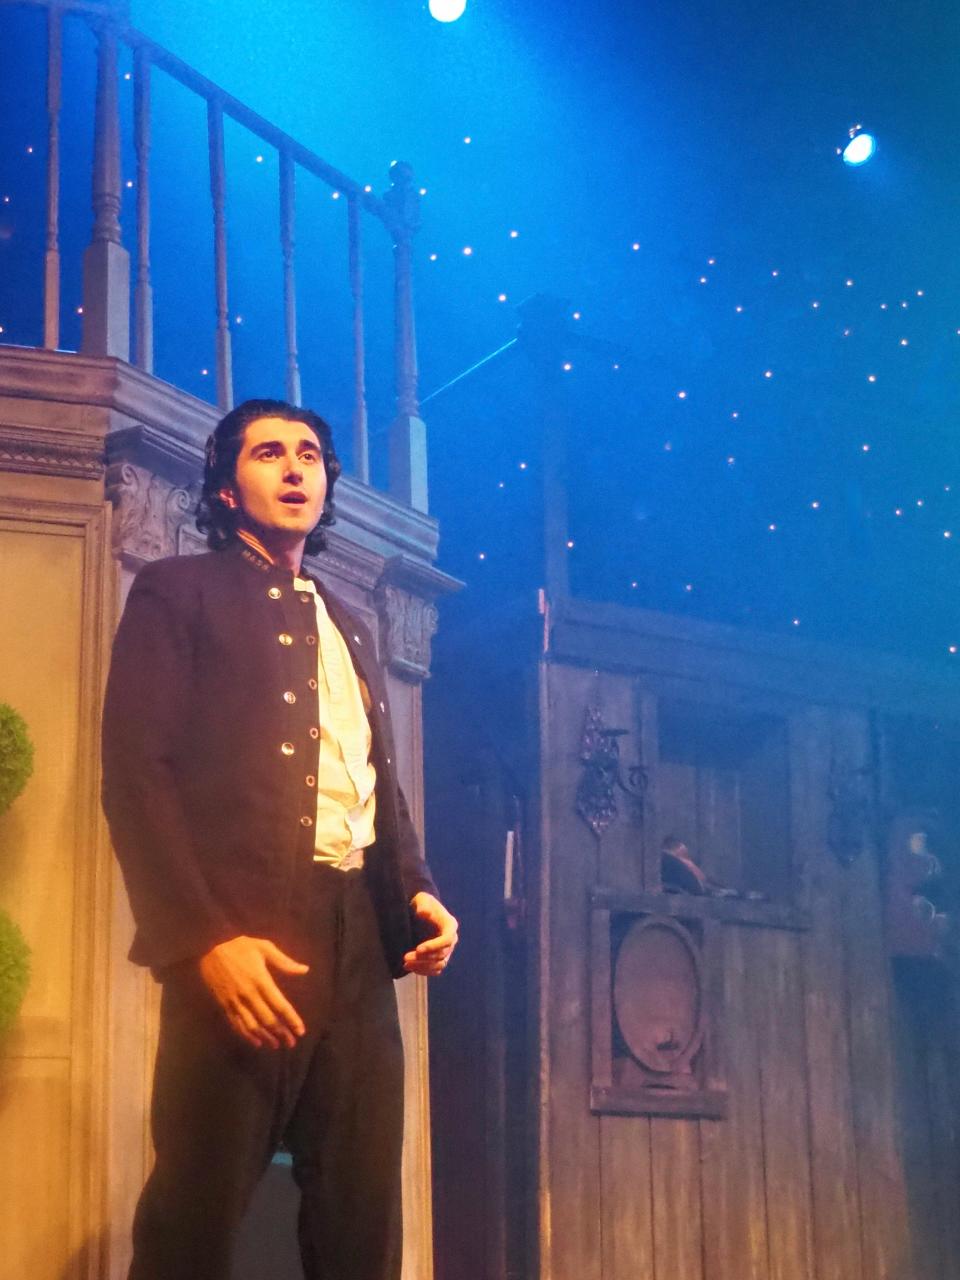 Shayan Sobhian appears in The Company Theatre's production of "Sweeney Todd: The Demon Barber of Fleet Street."